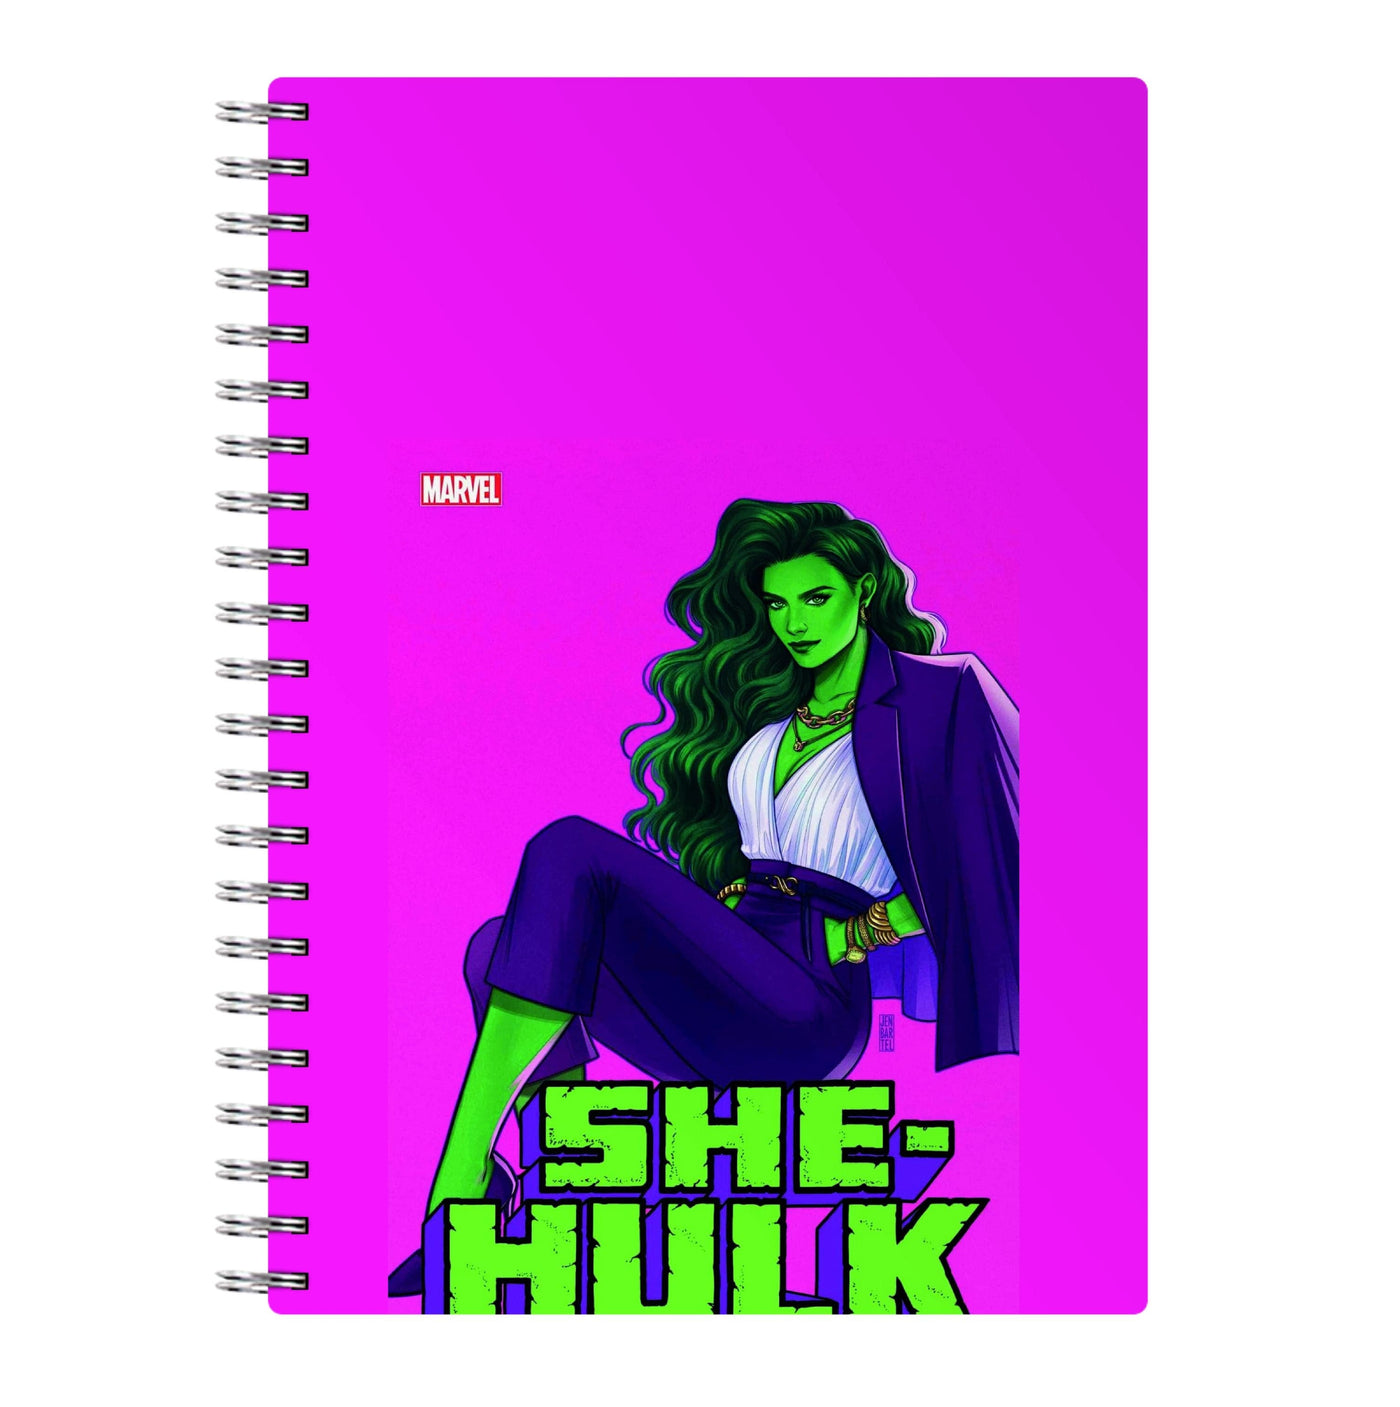 Suited Up - She Hulk Notebook